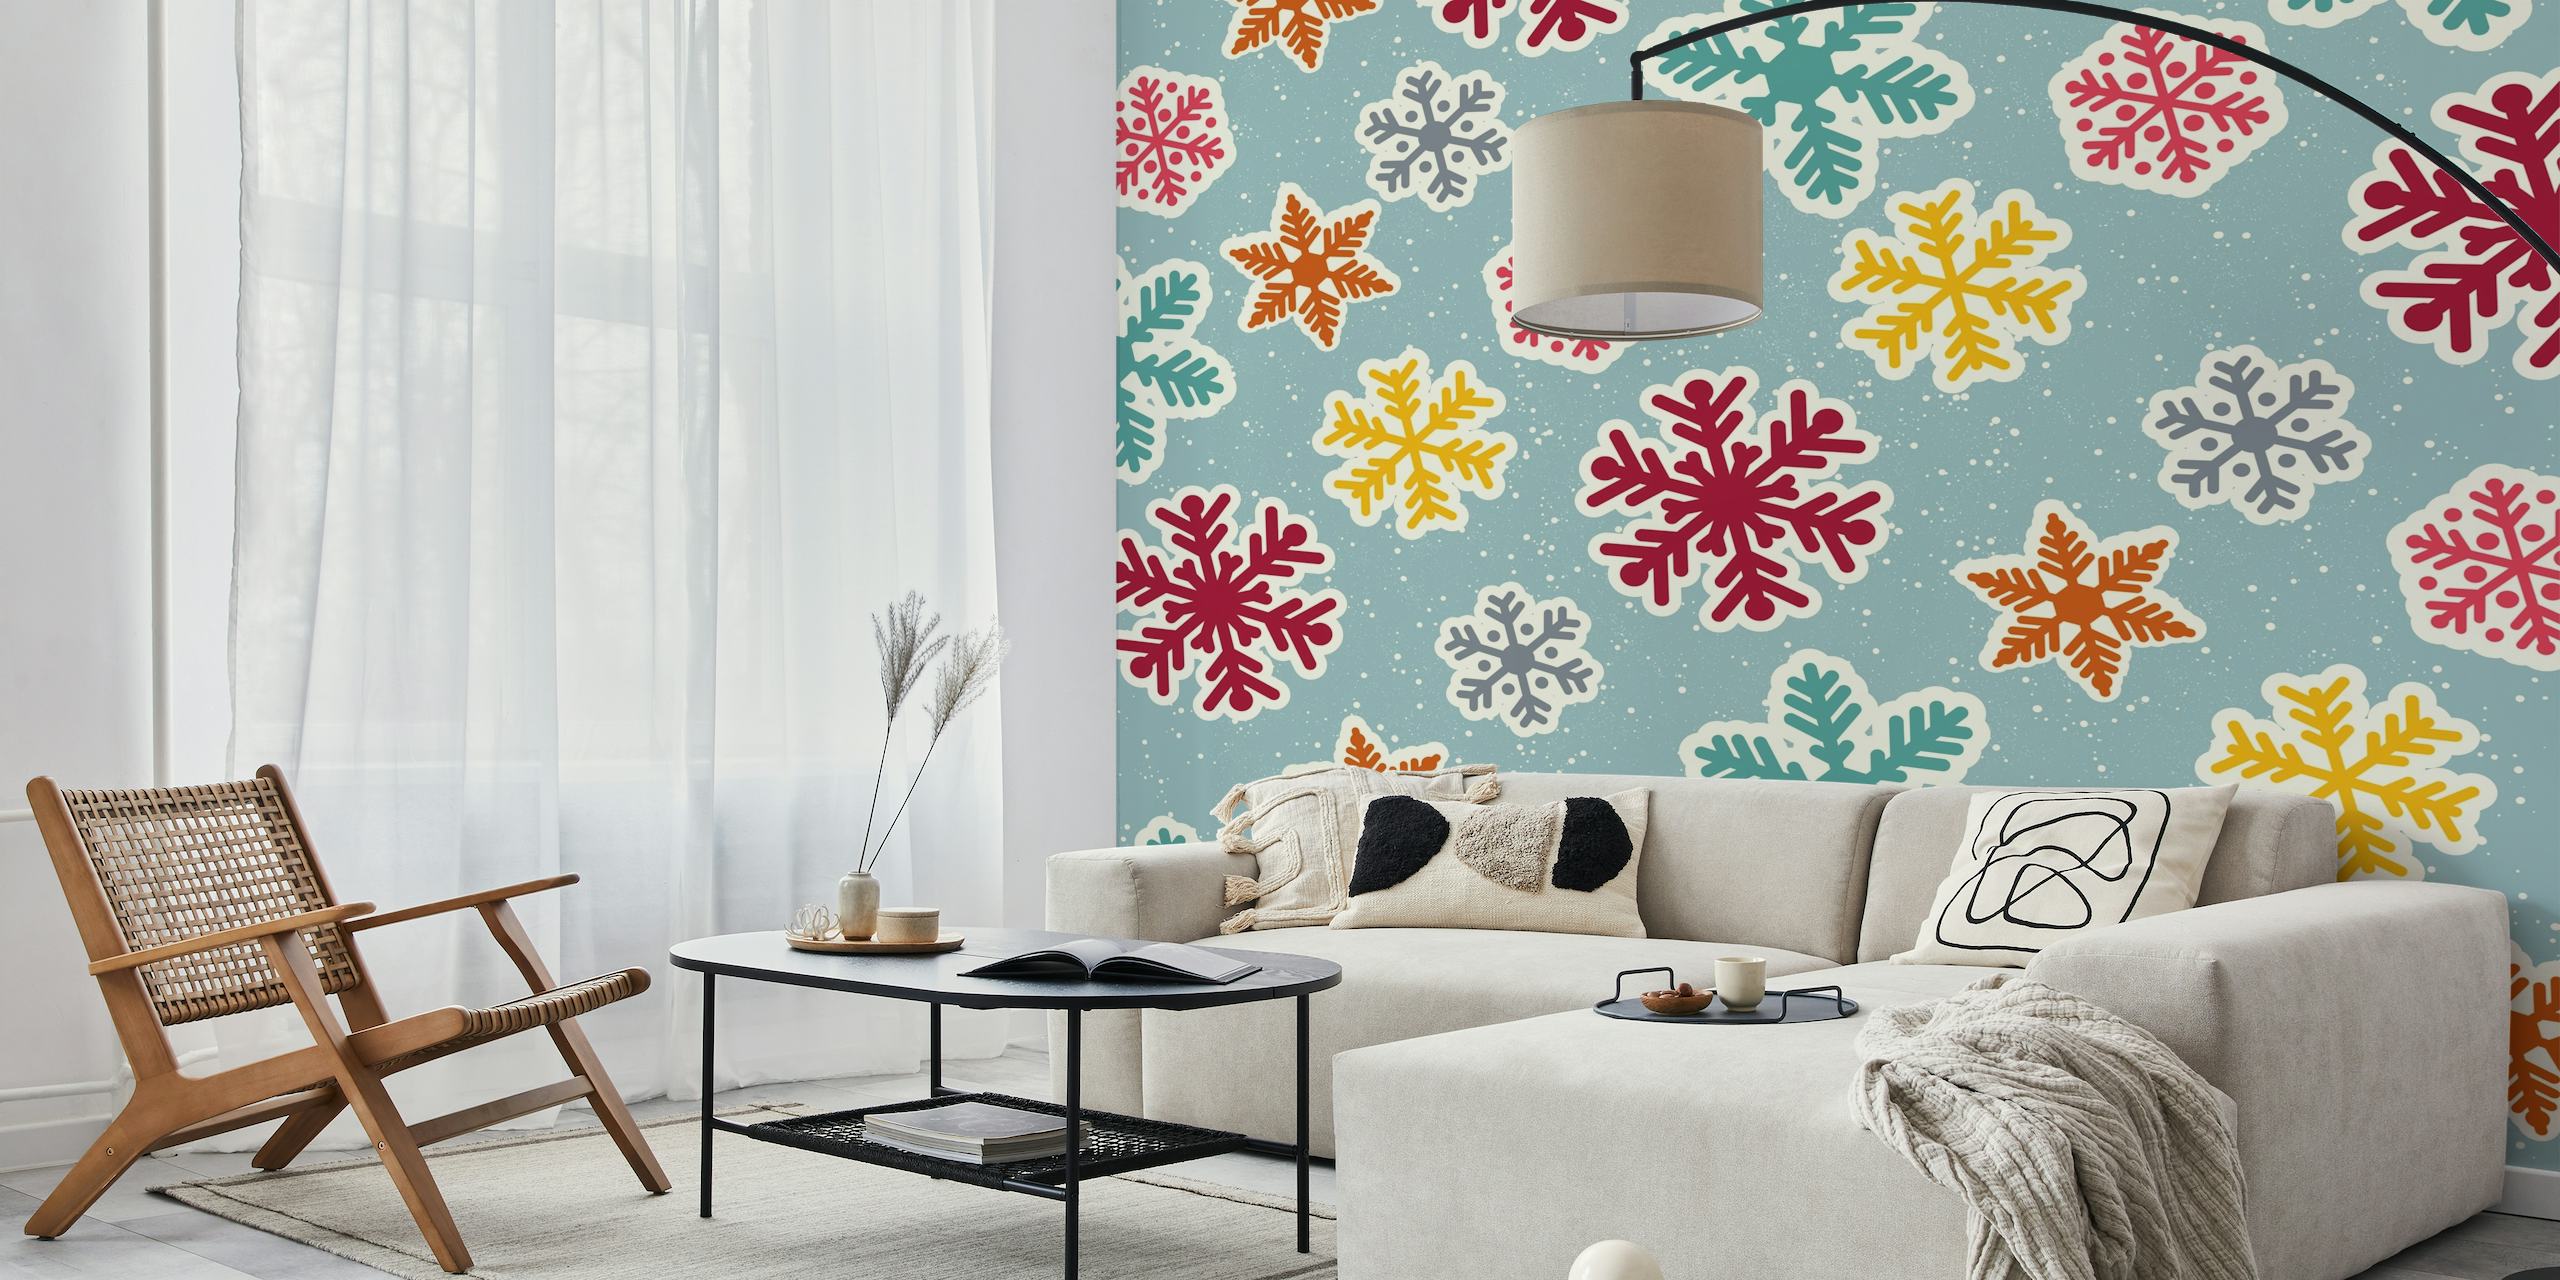 Mid Century Snowflakes wall mural with red, orange, and blue snowflakes on a pale blue background